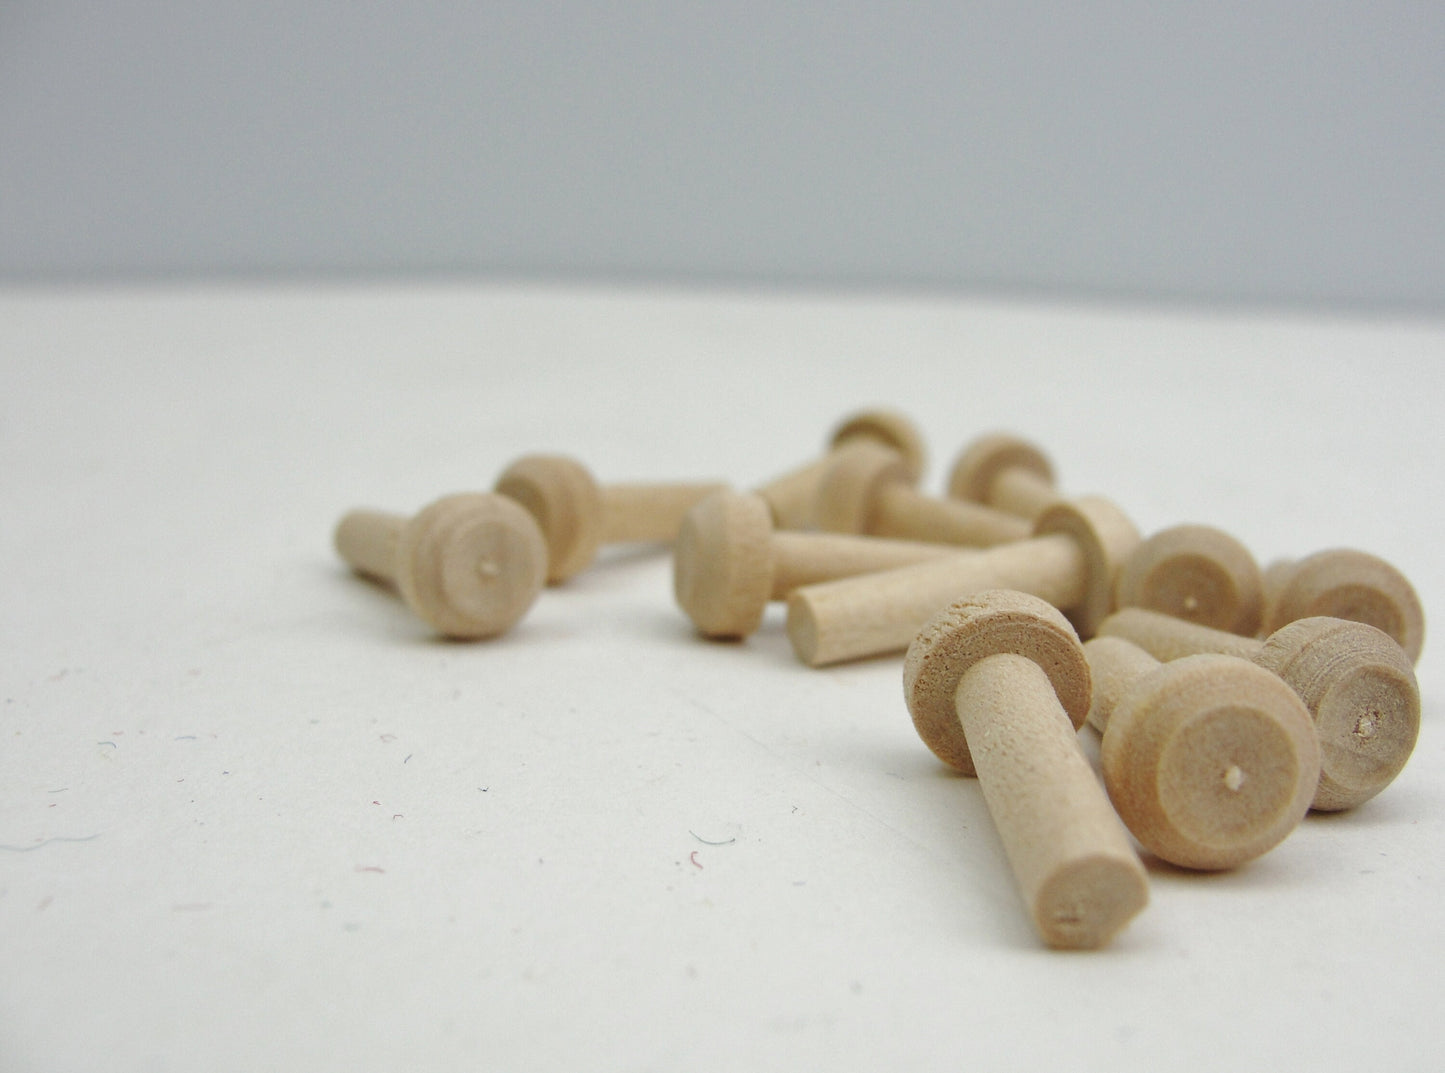 Tiny wooden peg 13/16" toy axle unfinished DIY set of 12